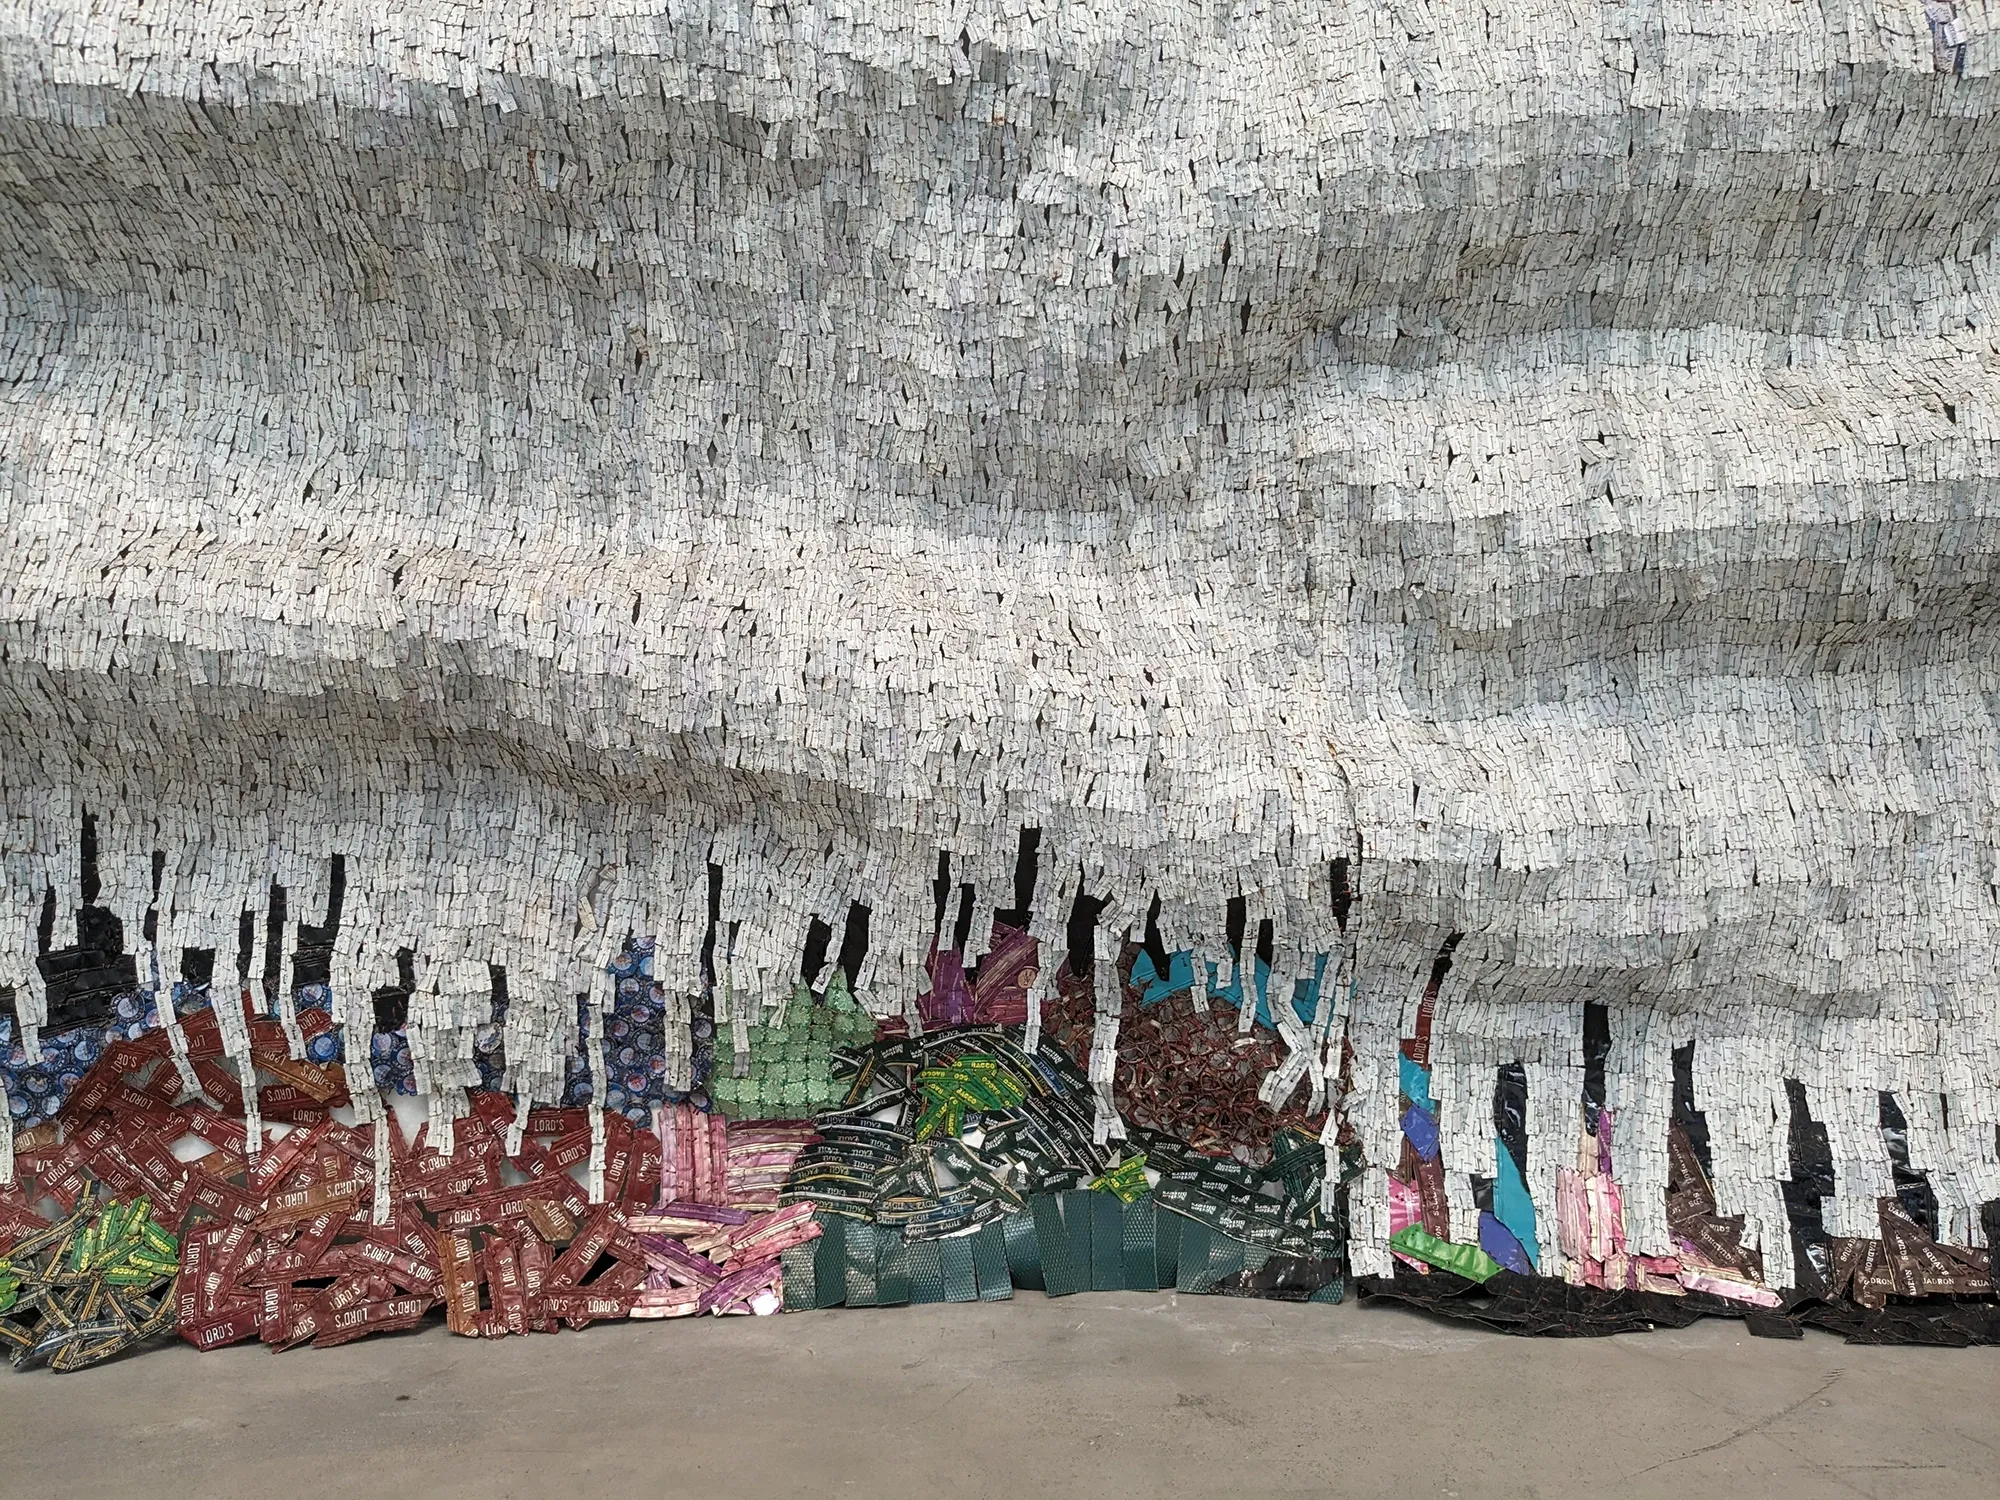 el anatsui famous contemporary artist and sculpture in installation art from Ghana on view in Guggenheim Museum Bilbao, tapestry-like recycled materials munchies art club magazine